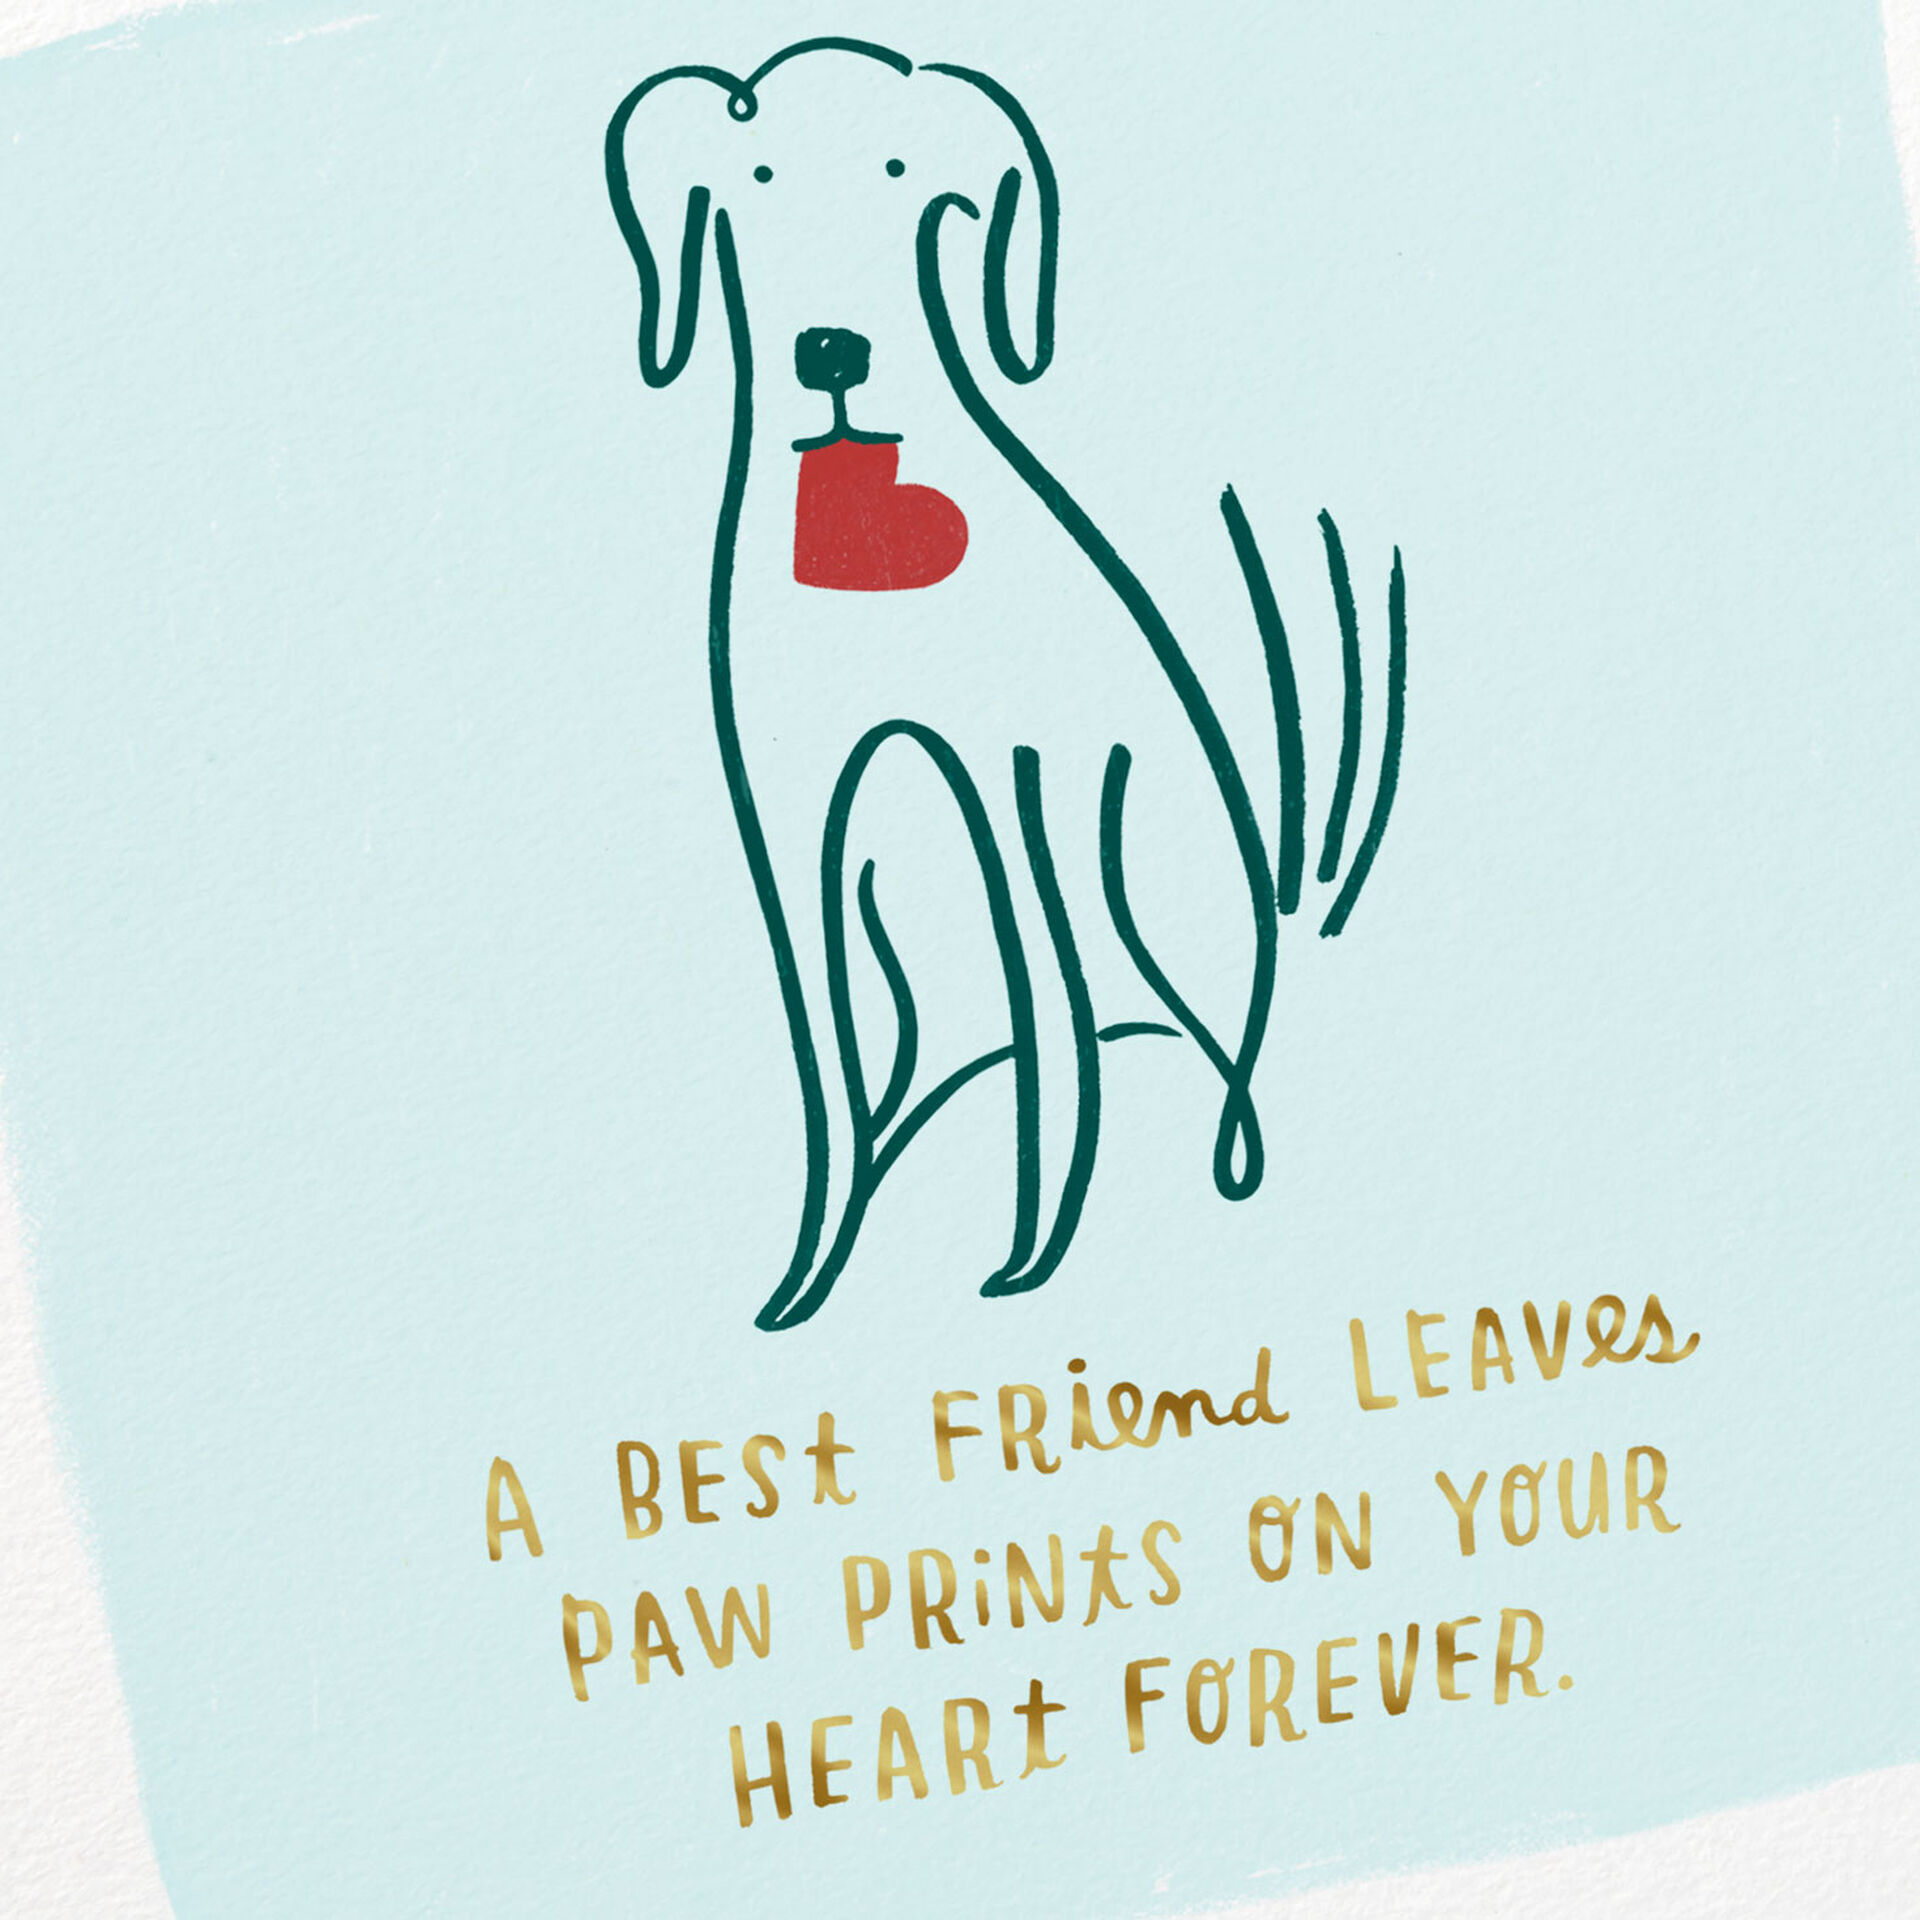 Dog-Carrying-a-Heart-Sympathy-Card-for-Loss-of-Pet_359YYS1436_04